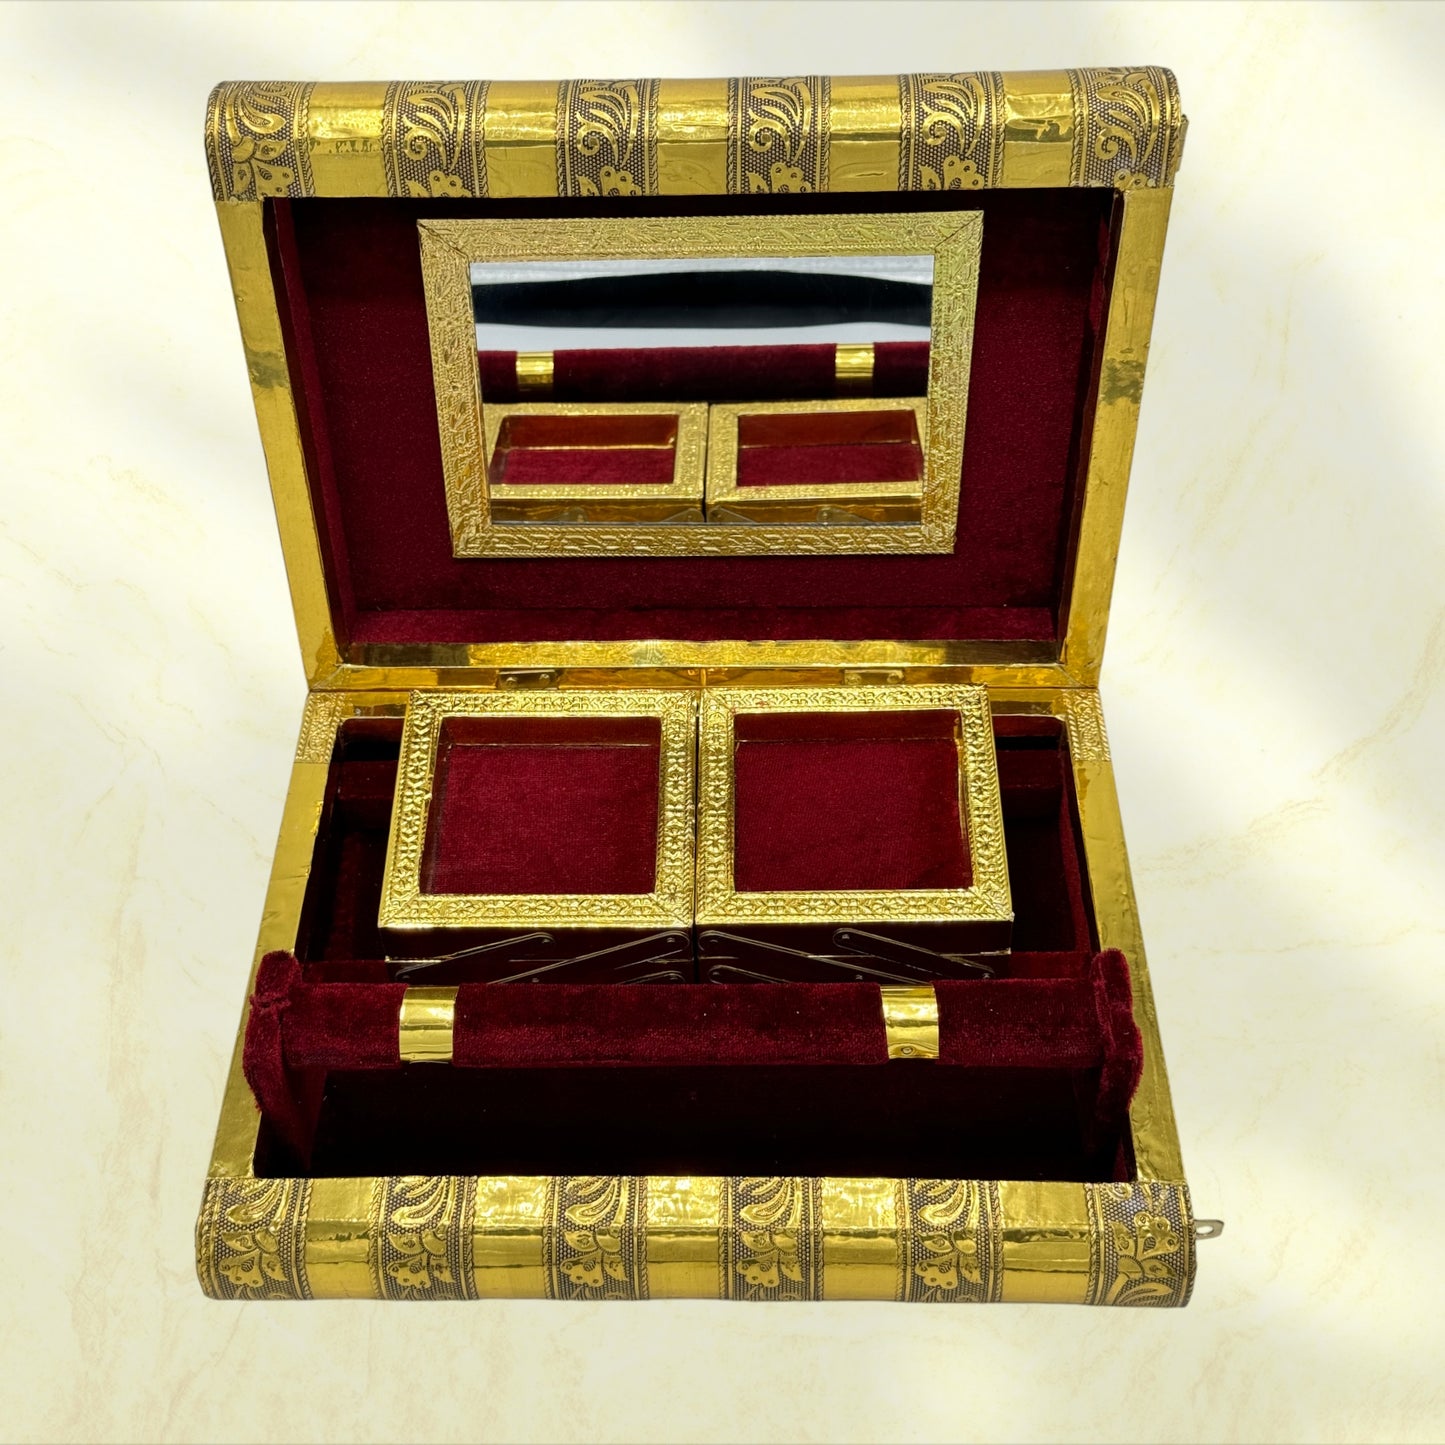 Majestic Indian Tiger Handmade Jewelry Holder Box - Tortuna shows red box open with trays closed